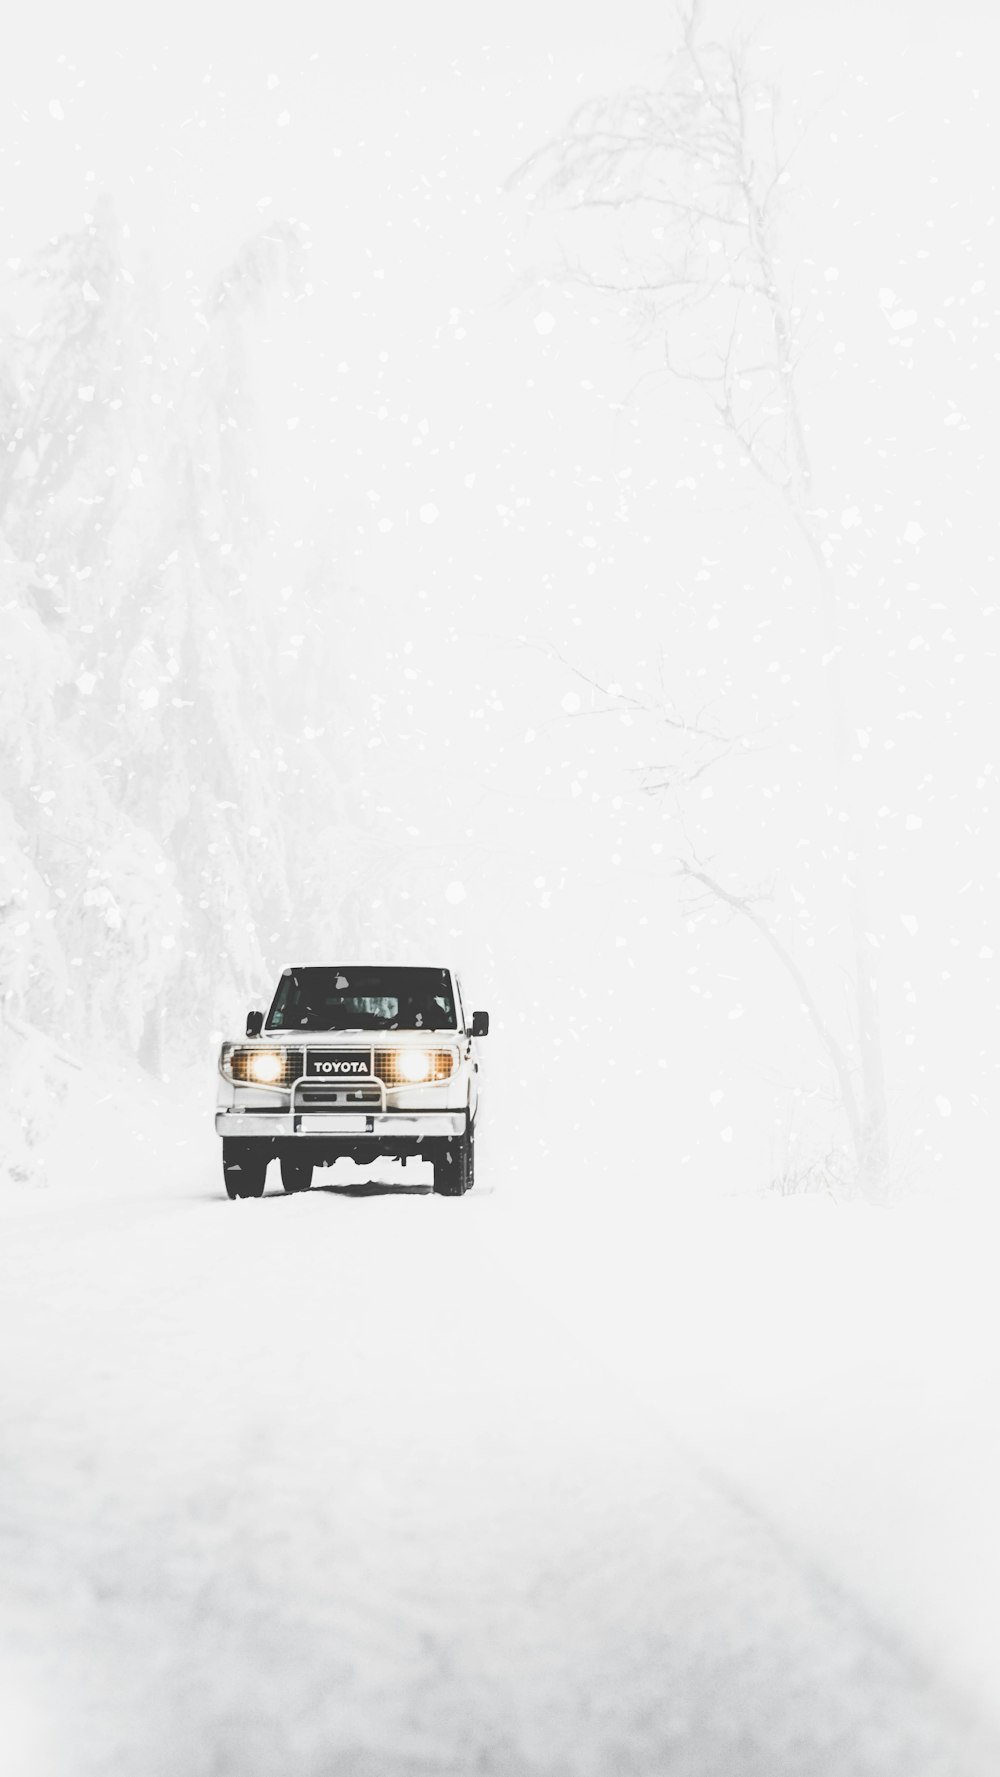 Toyota SUV covered with snow